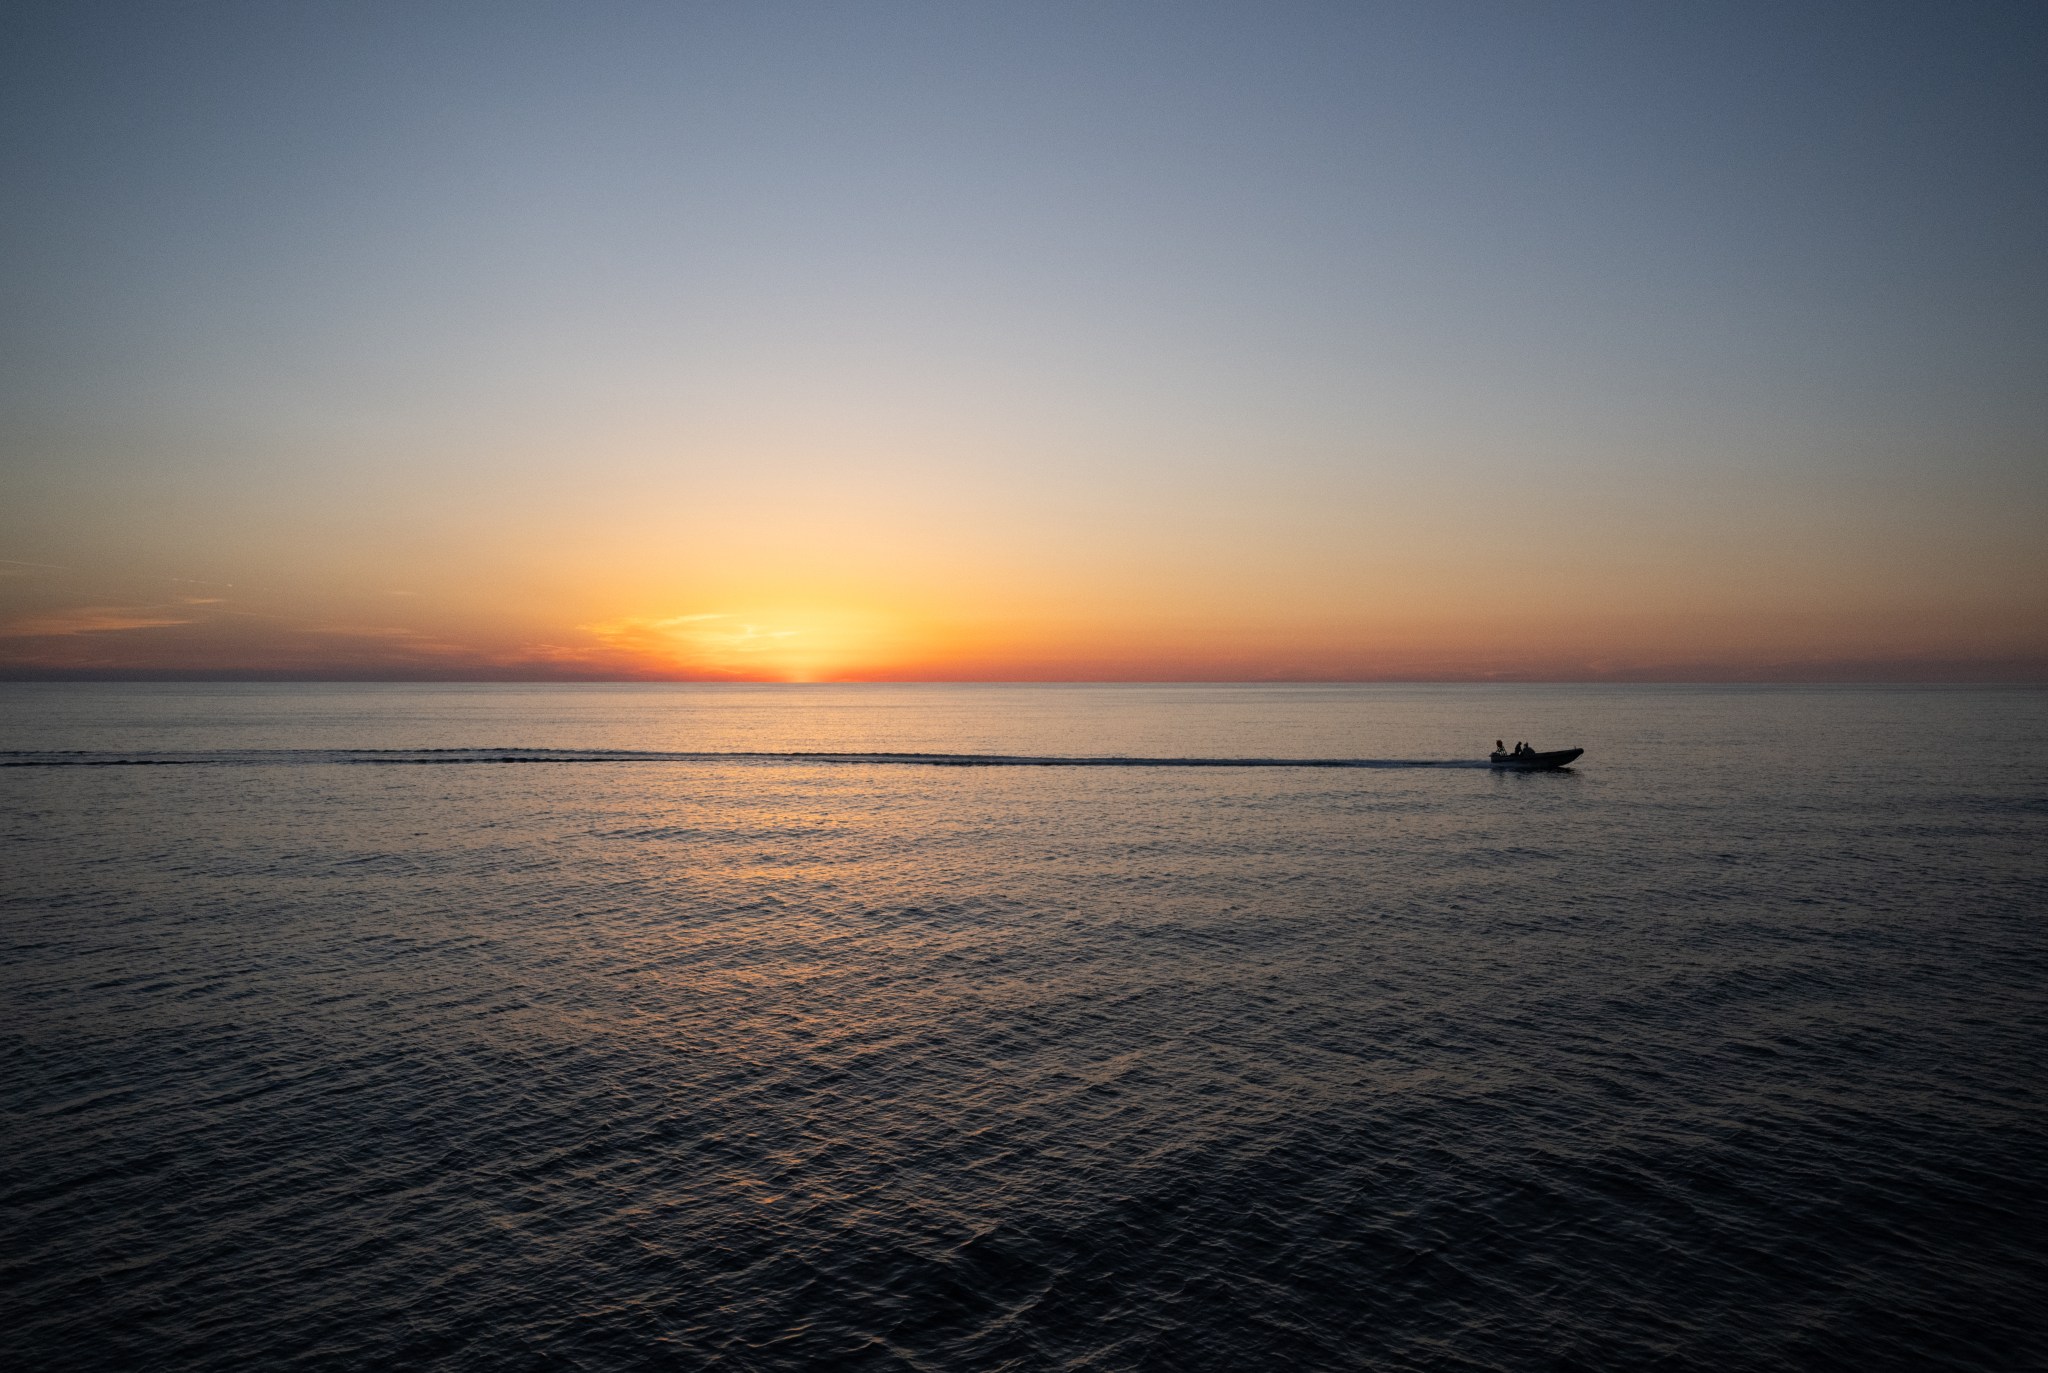 The sky and water take up equal parts of this image. At the horizon, the Sun colors the sky orange, with its light reflecting off a few distant clouds. A fast boat in the distance cuts a line across the water as it moves from left to right. The boat and the person aboard are in silhouette.